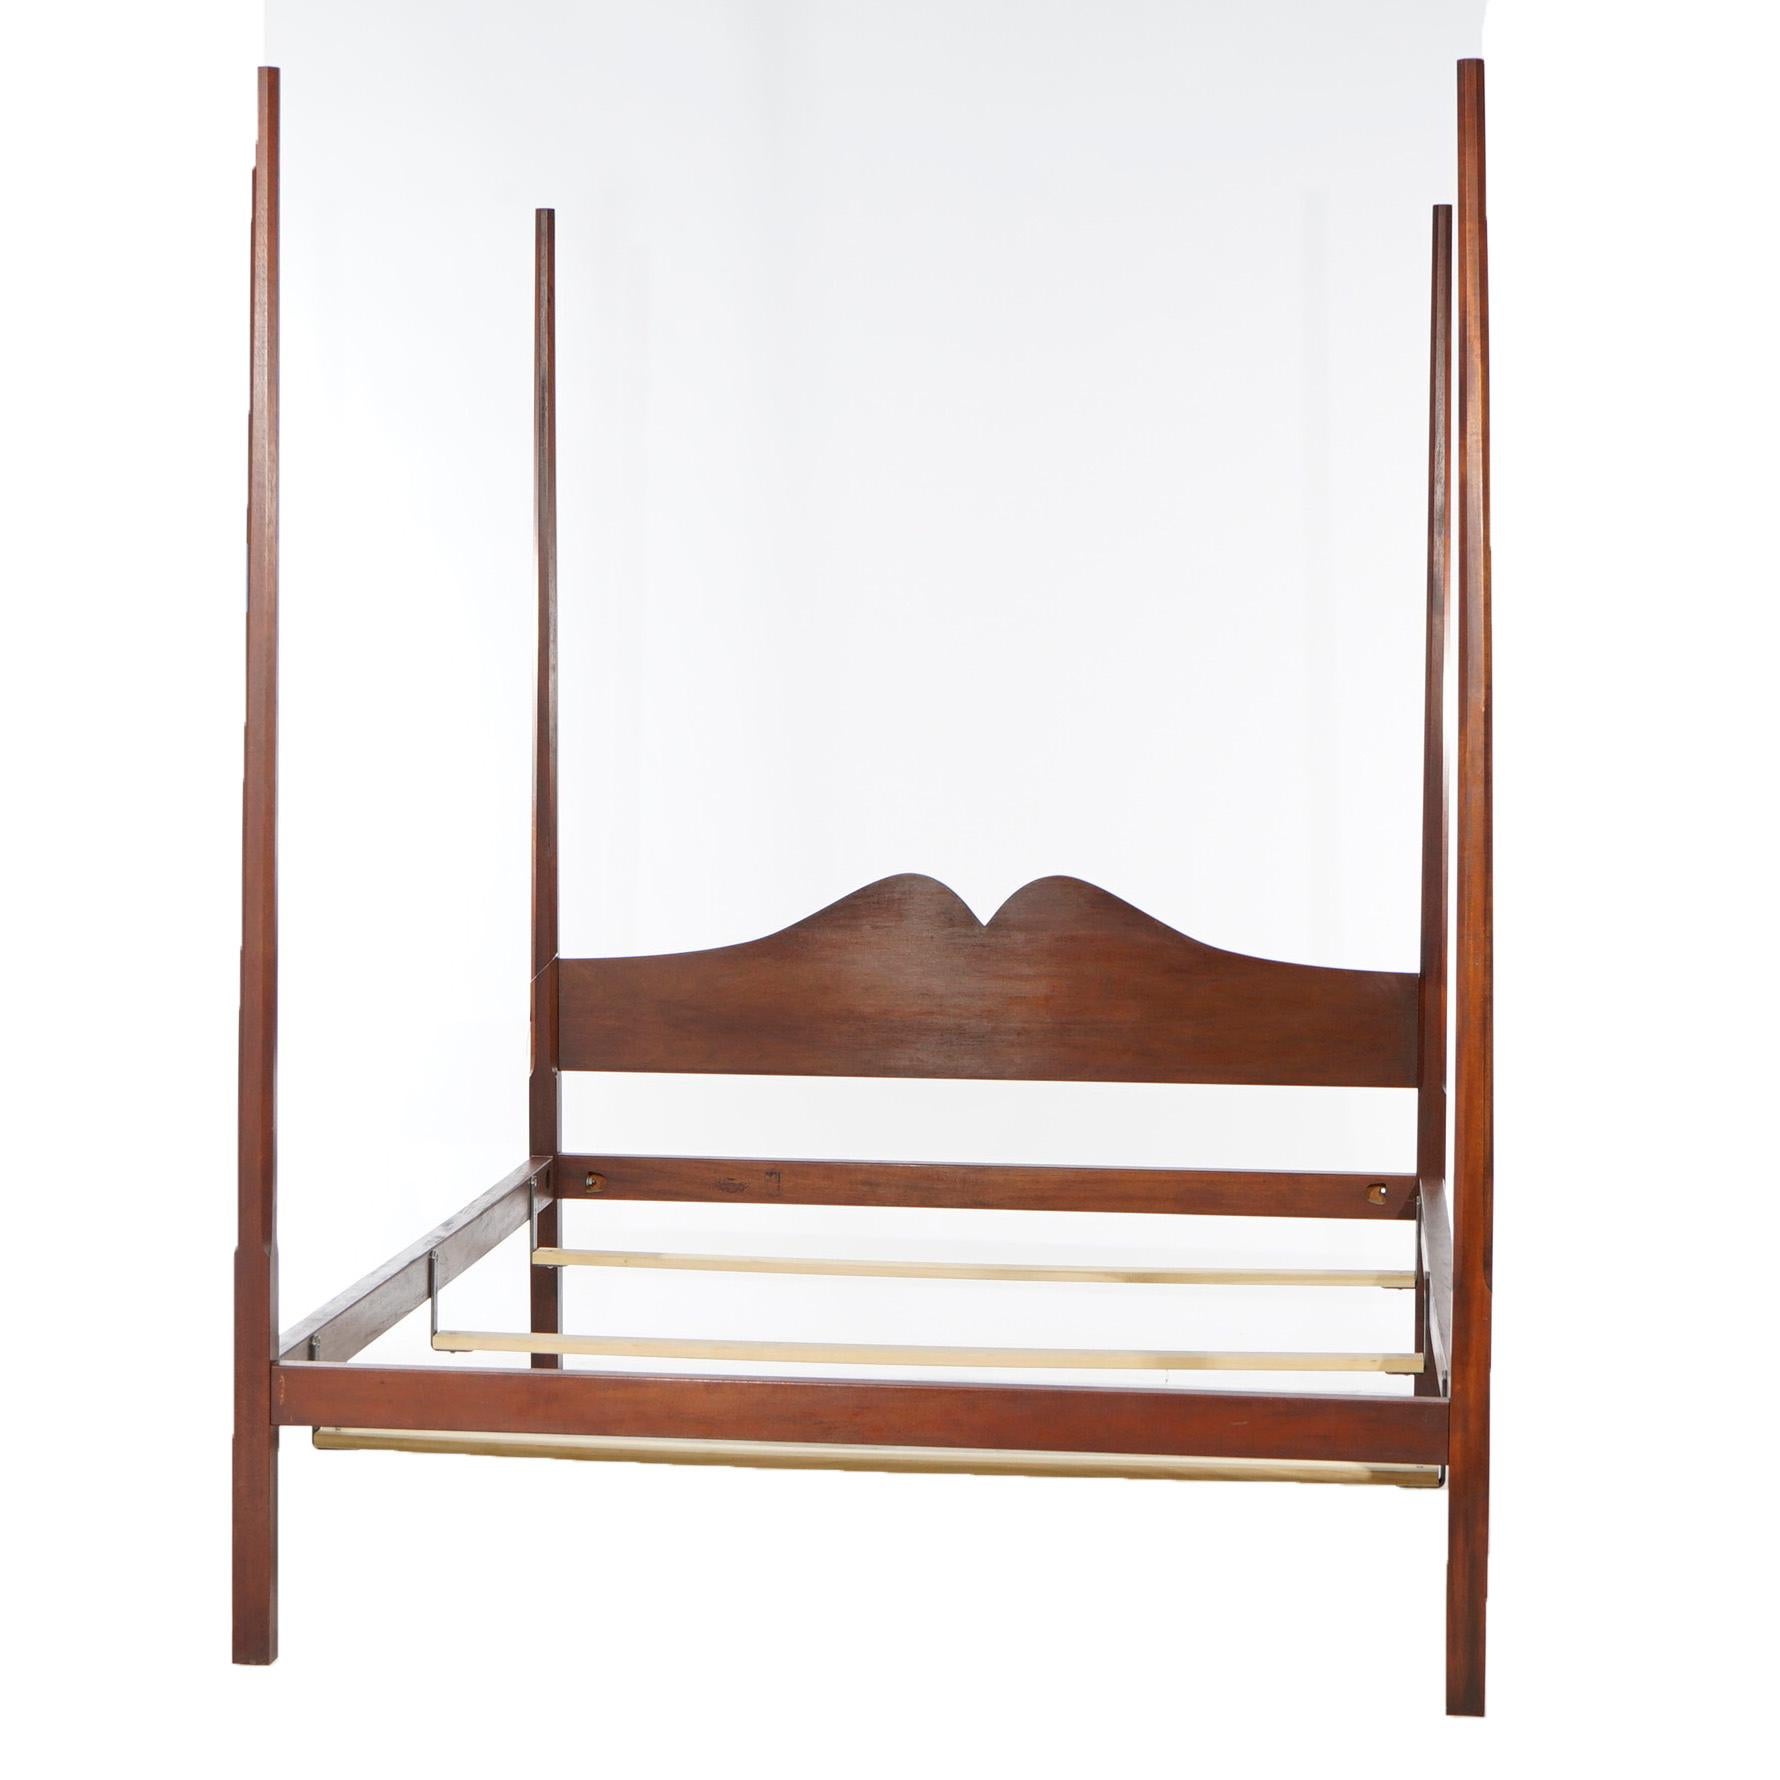 A Federal style pencil post canopy queen size bed frame of The Bartley Collection for the Henry Ford Museum offers mahogany construction with shaped headboard, maker marks as photographed, 20th century

Measures- 83.5'' H x 64.5'' W x 58.25'' D;